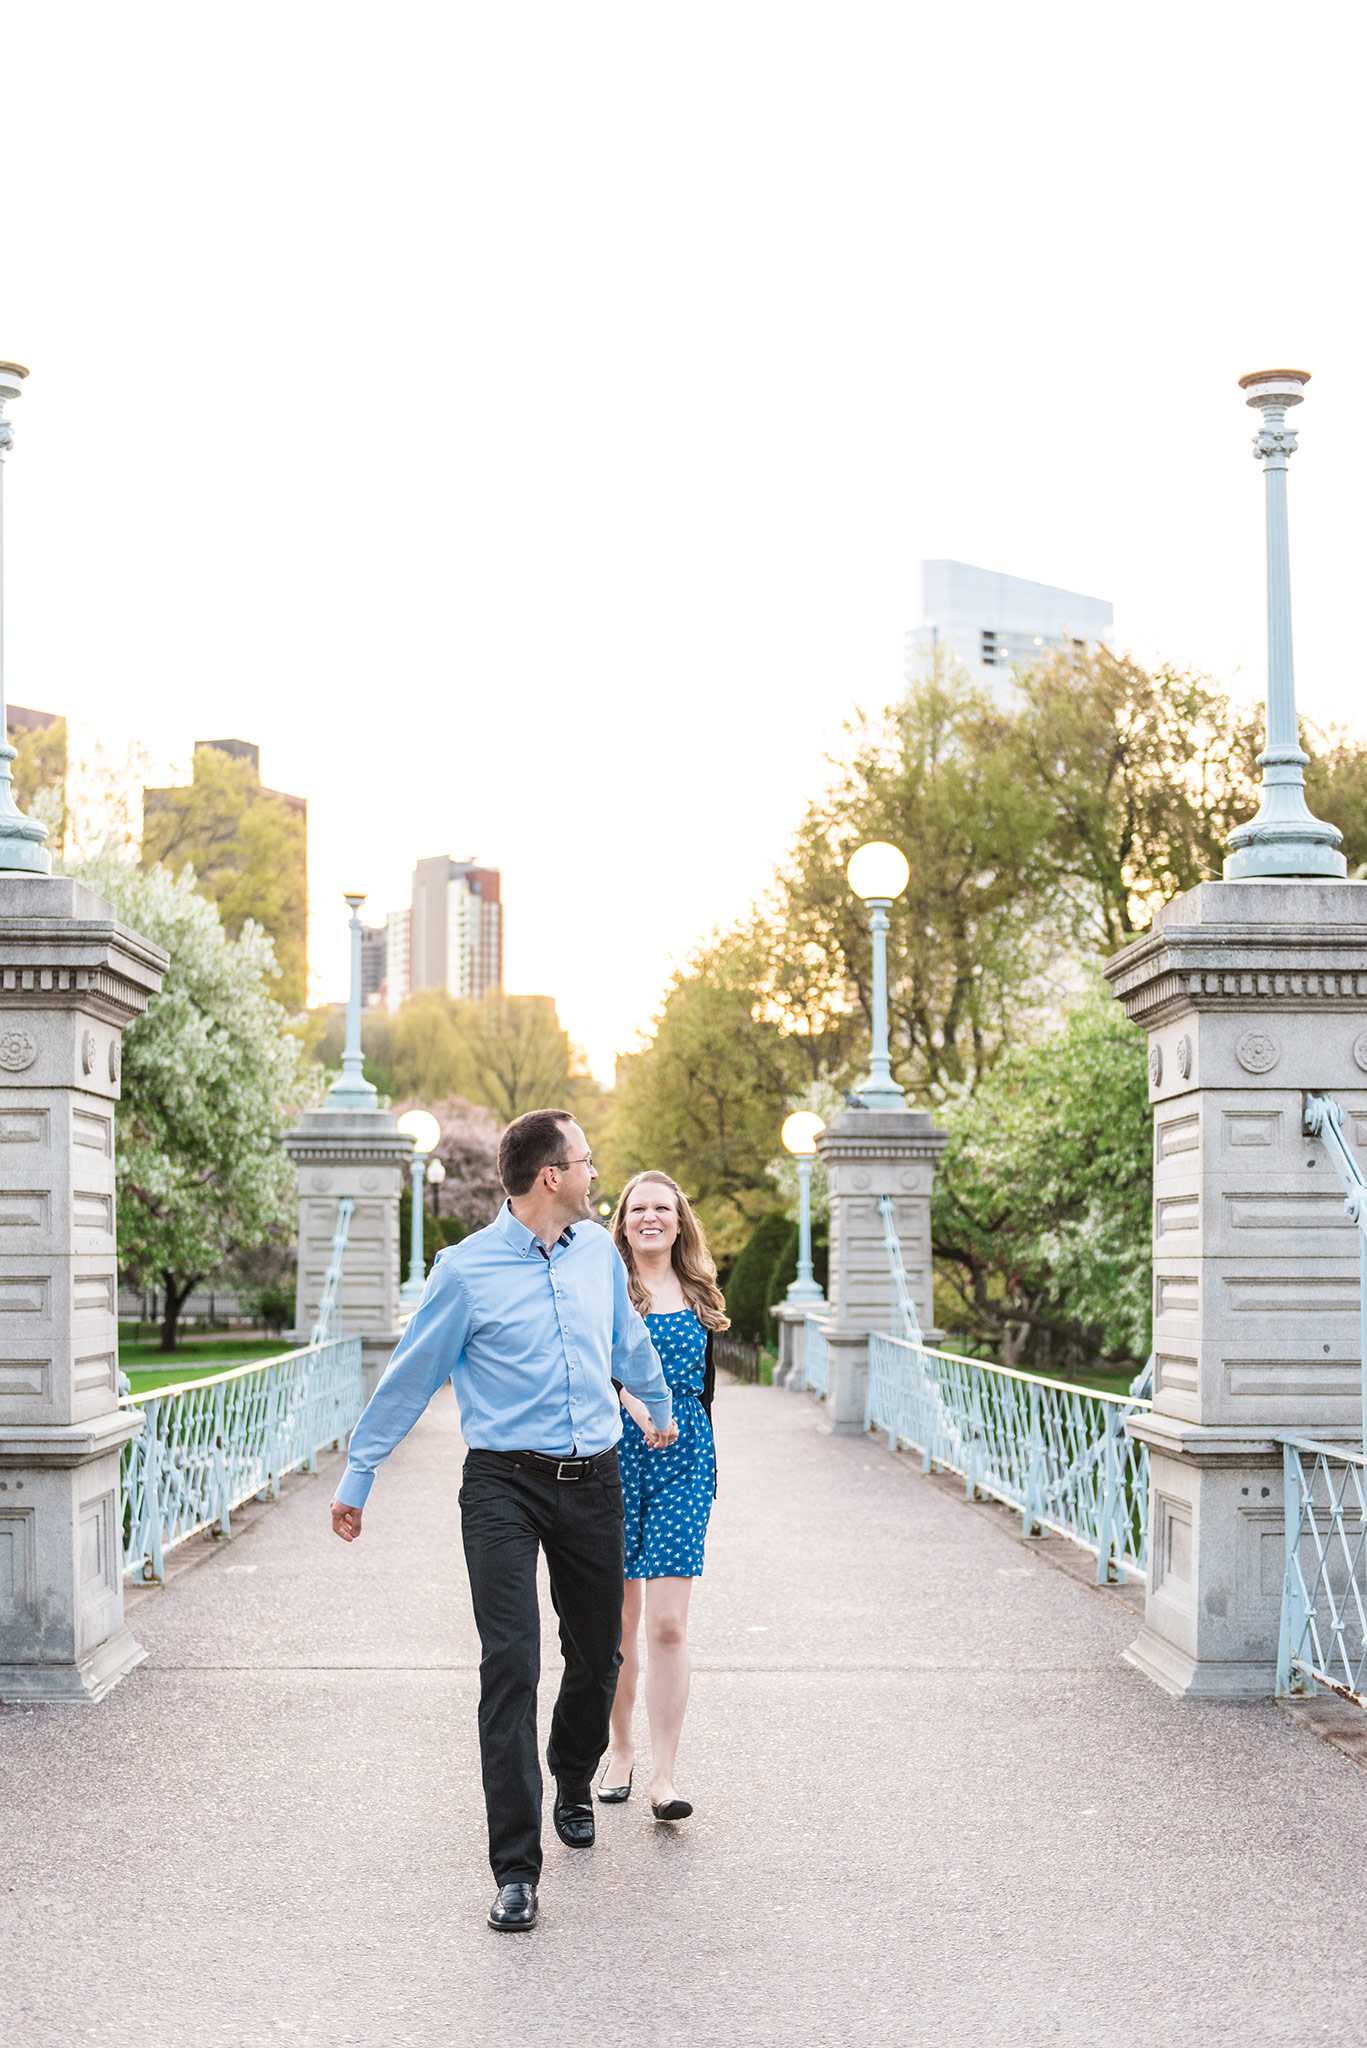 Classic + Modern Boston Public Garden, Beacon Hill, and Downtown Coffee Shop Sunrise Engagement Session | Jessica and Thomas | Lorna Stell | Photographer | Boston MA